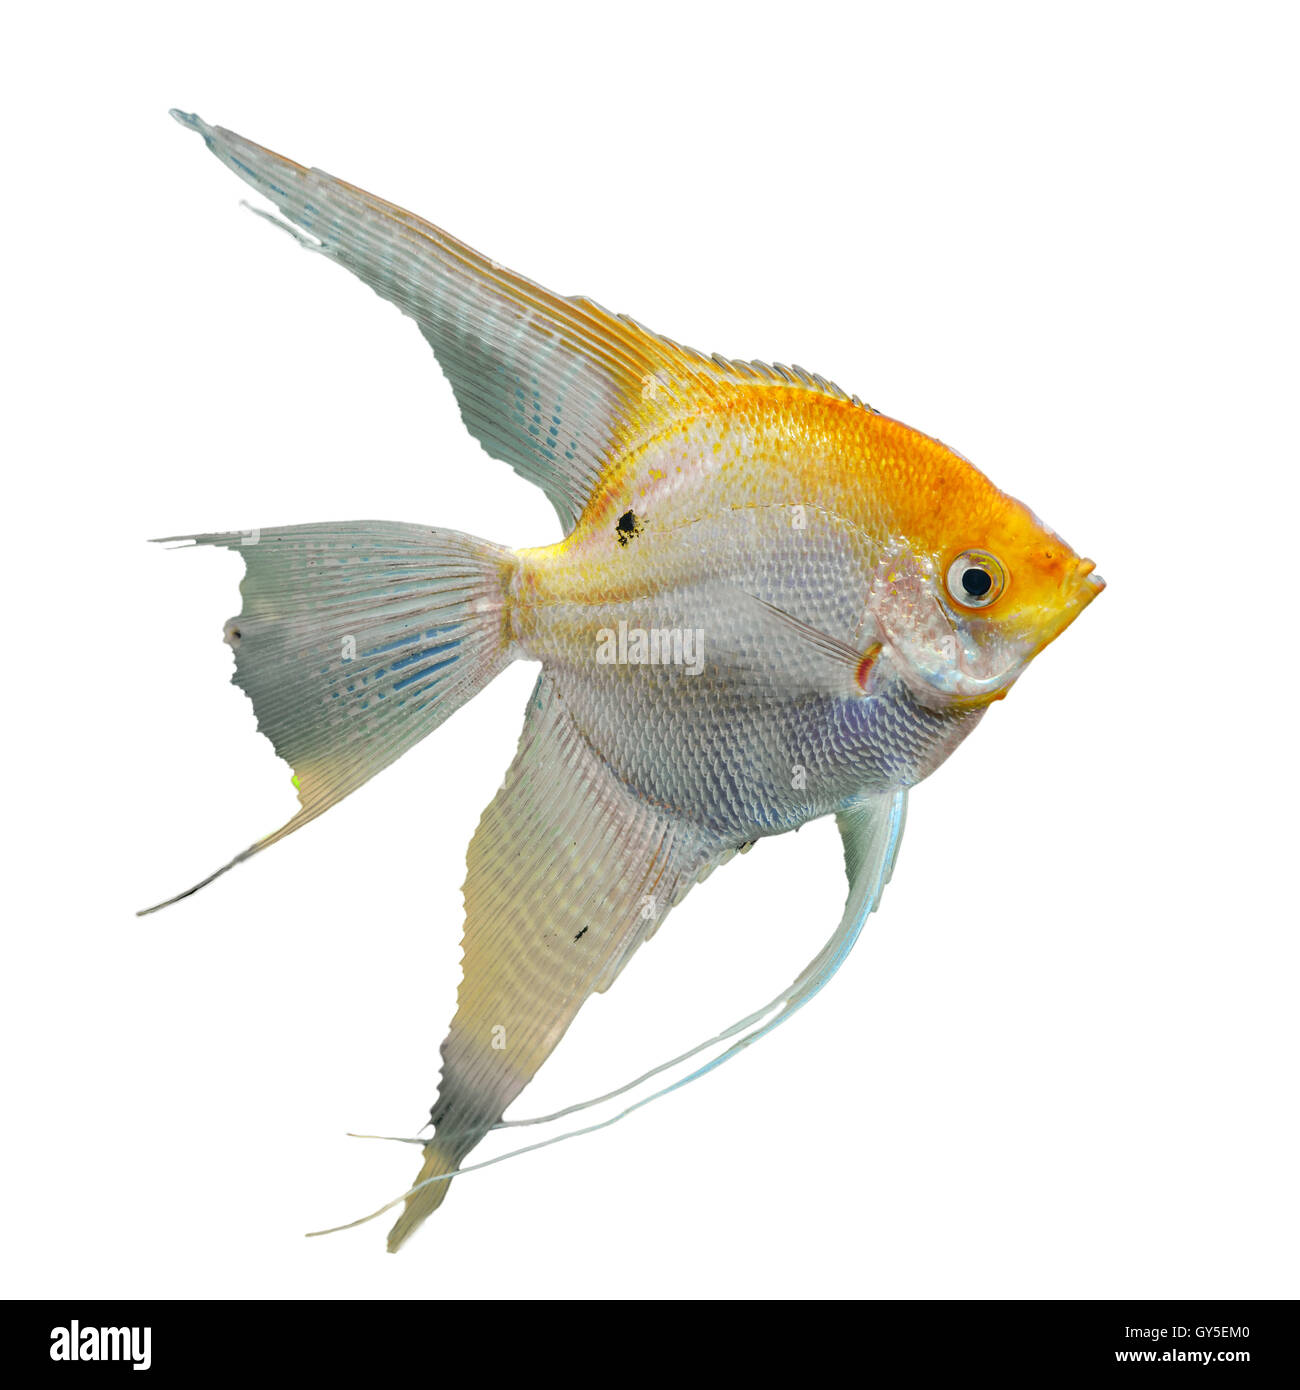 background with a portrait of the golden angel fish Stock Photo